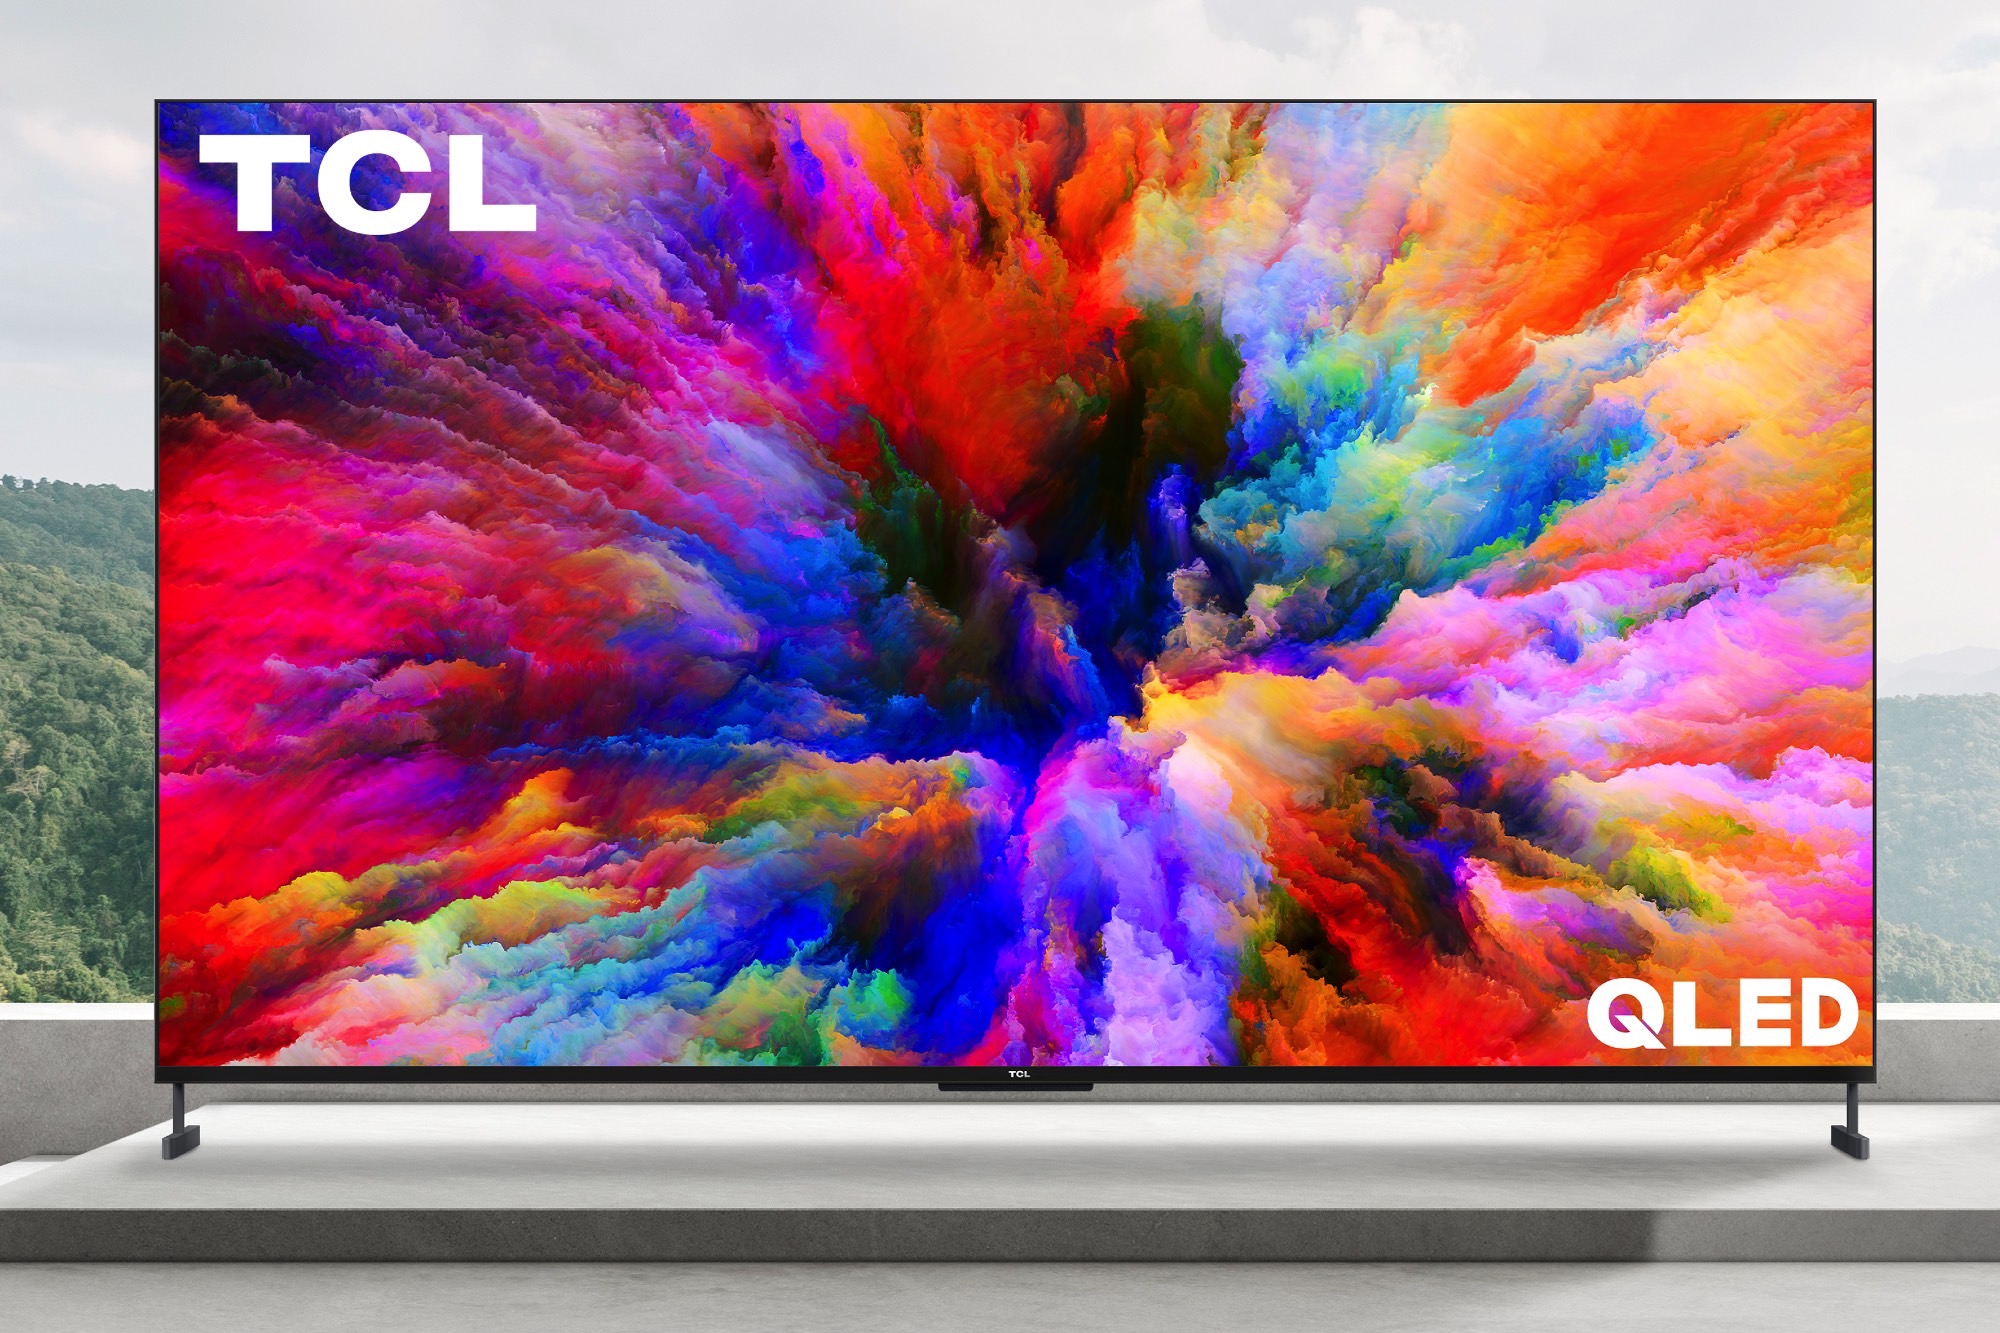 I've seen the 115-inch TCL Mini LED TV in action and now I want it